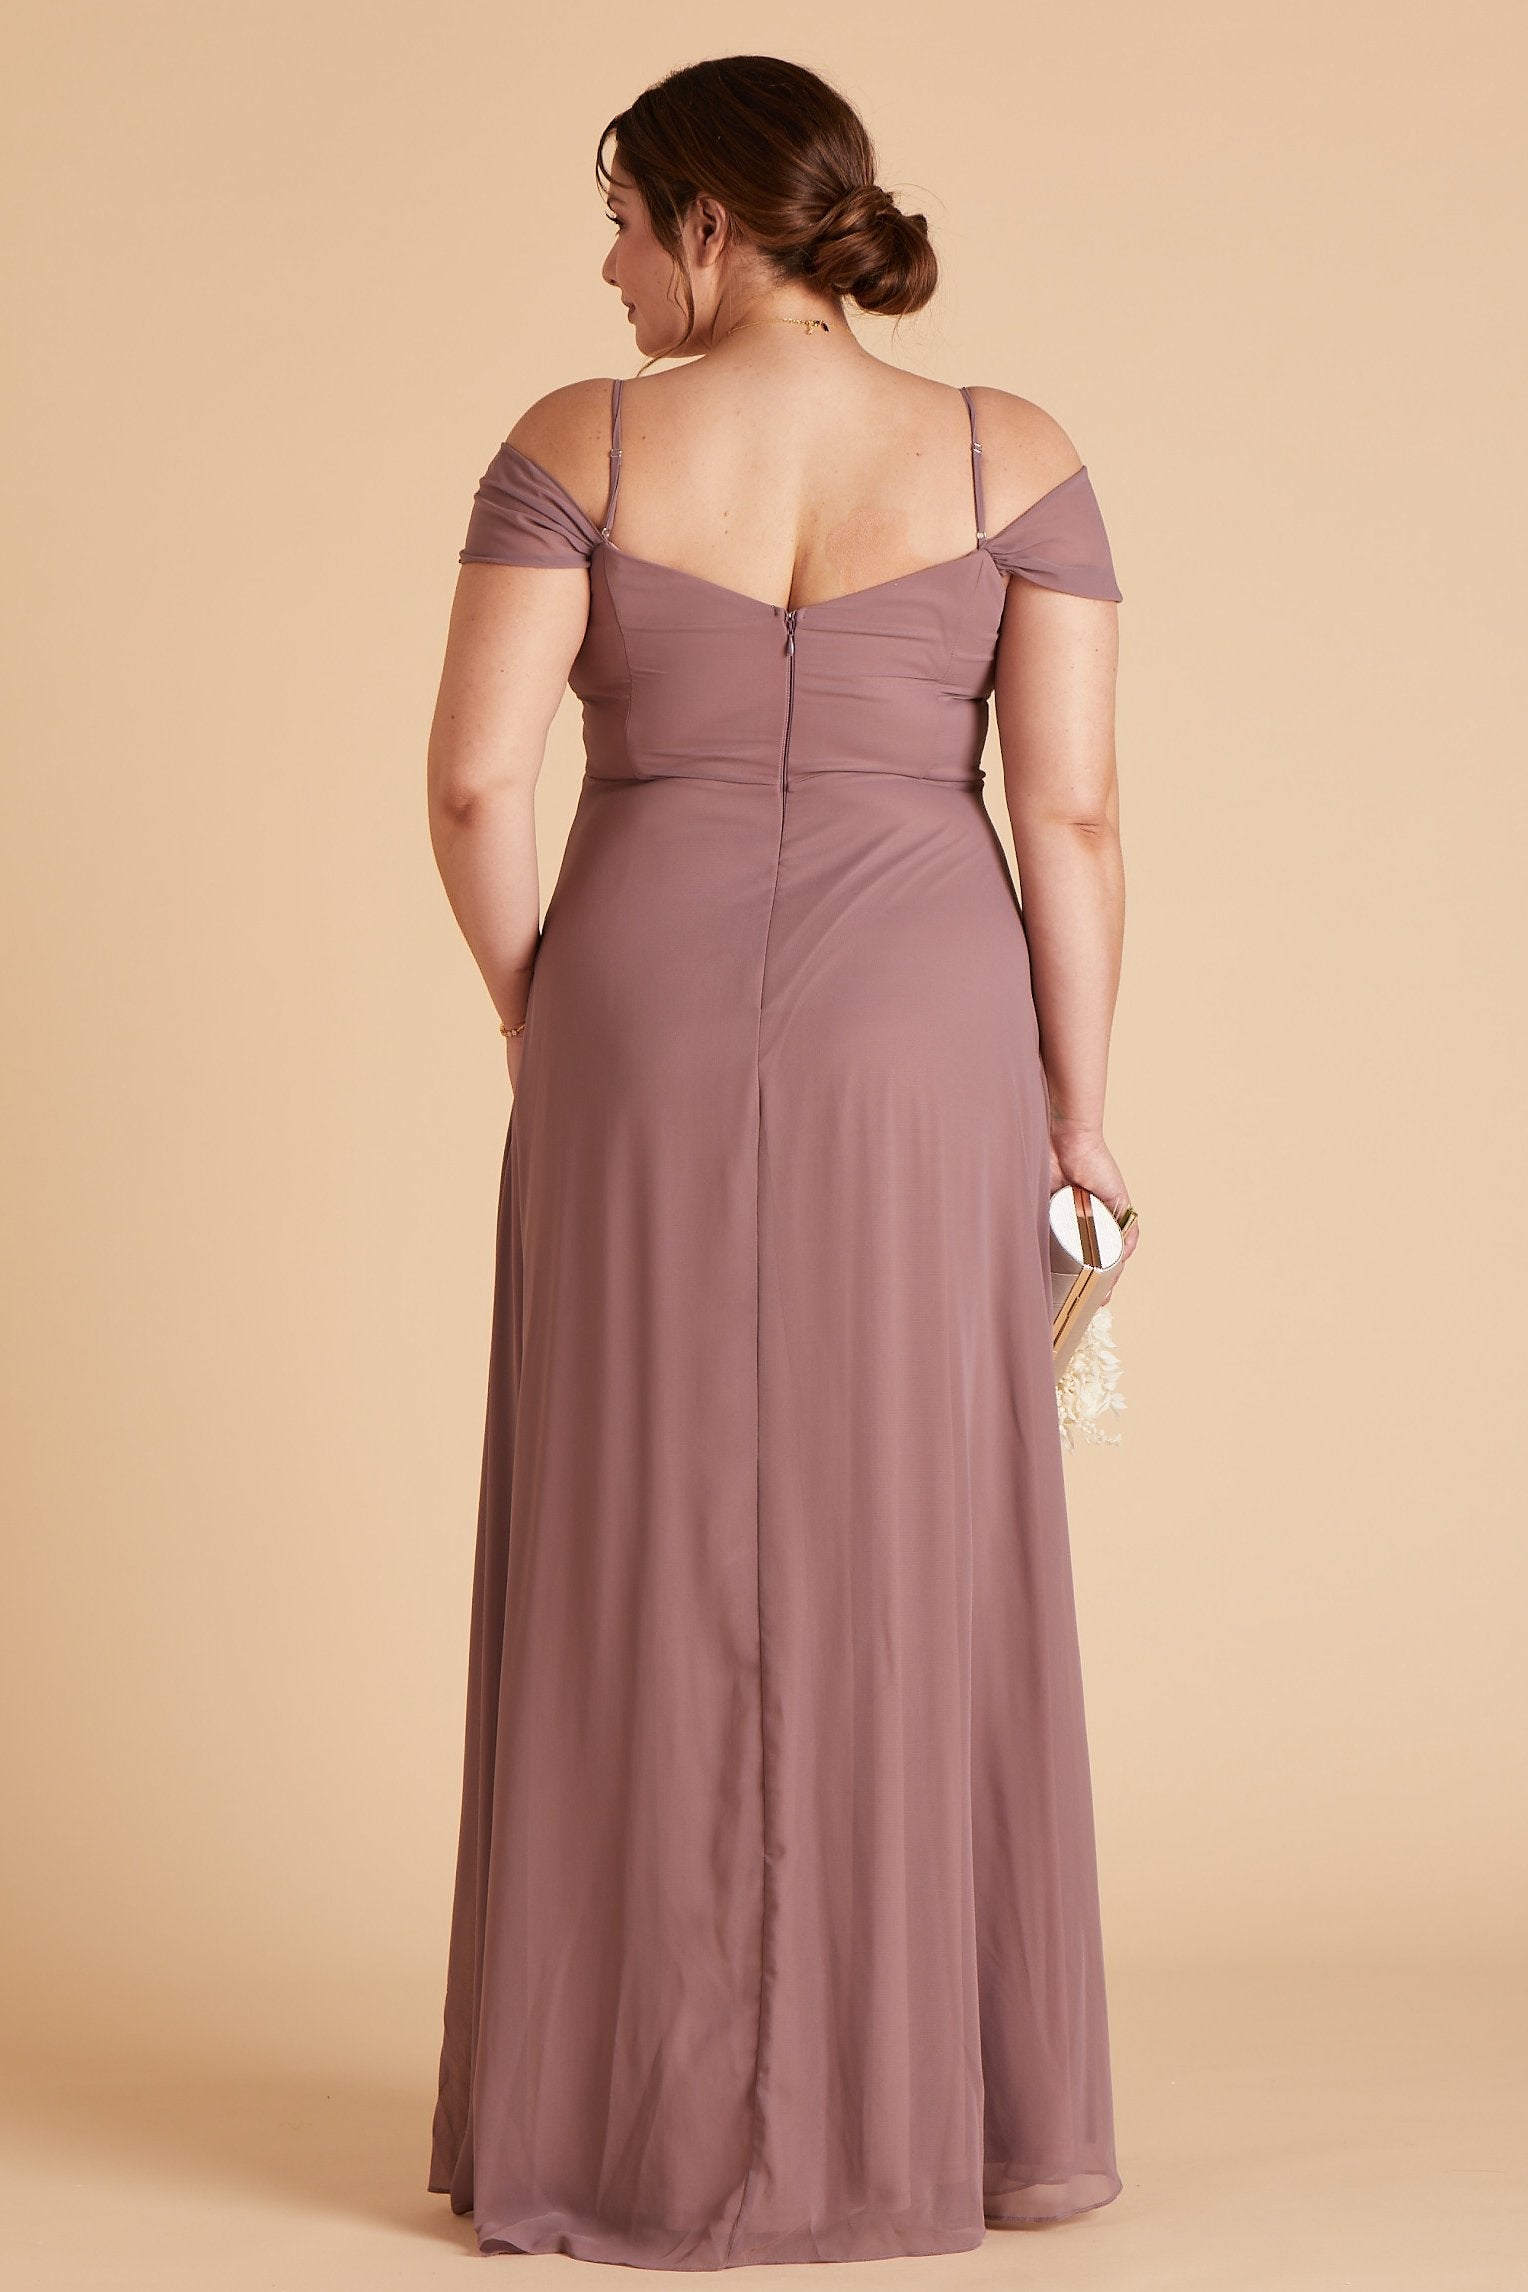 Spence convertible plus size bridesmaid dress in dark mauve chiffon by Birdy Grey, back view